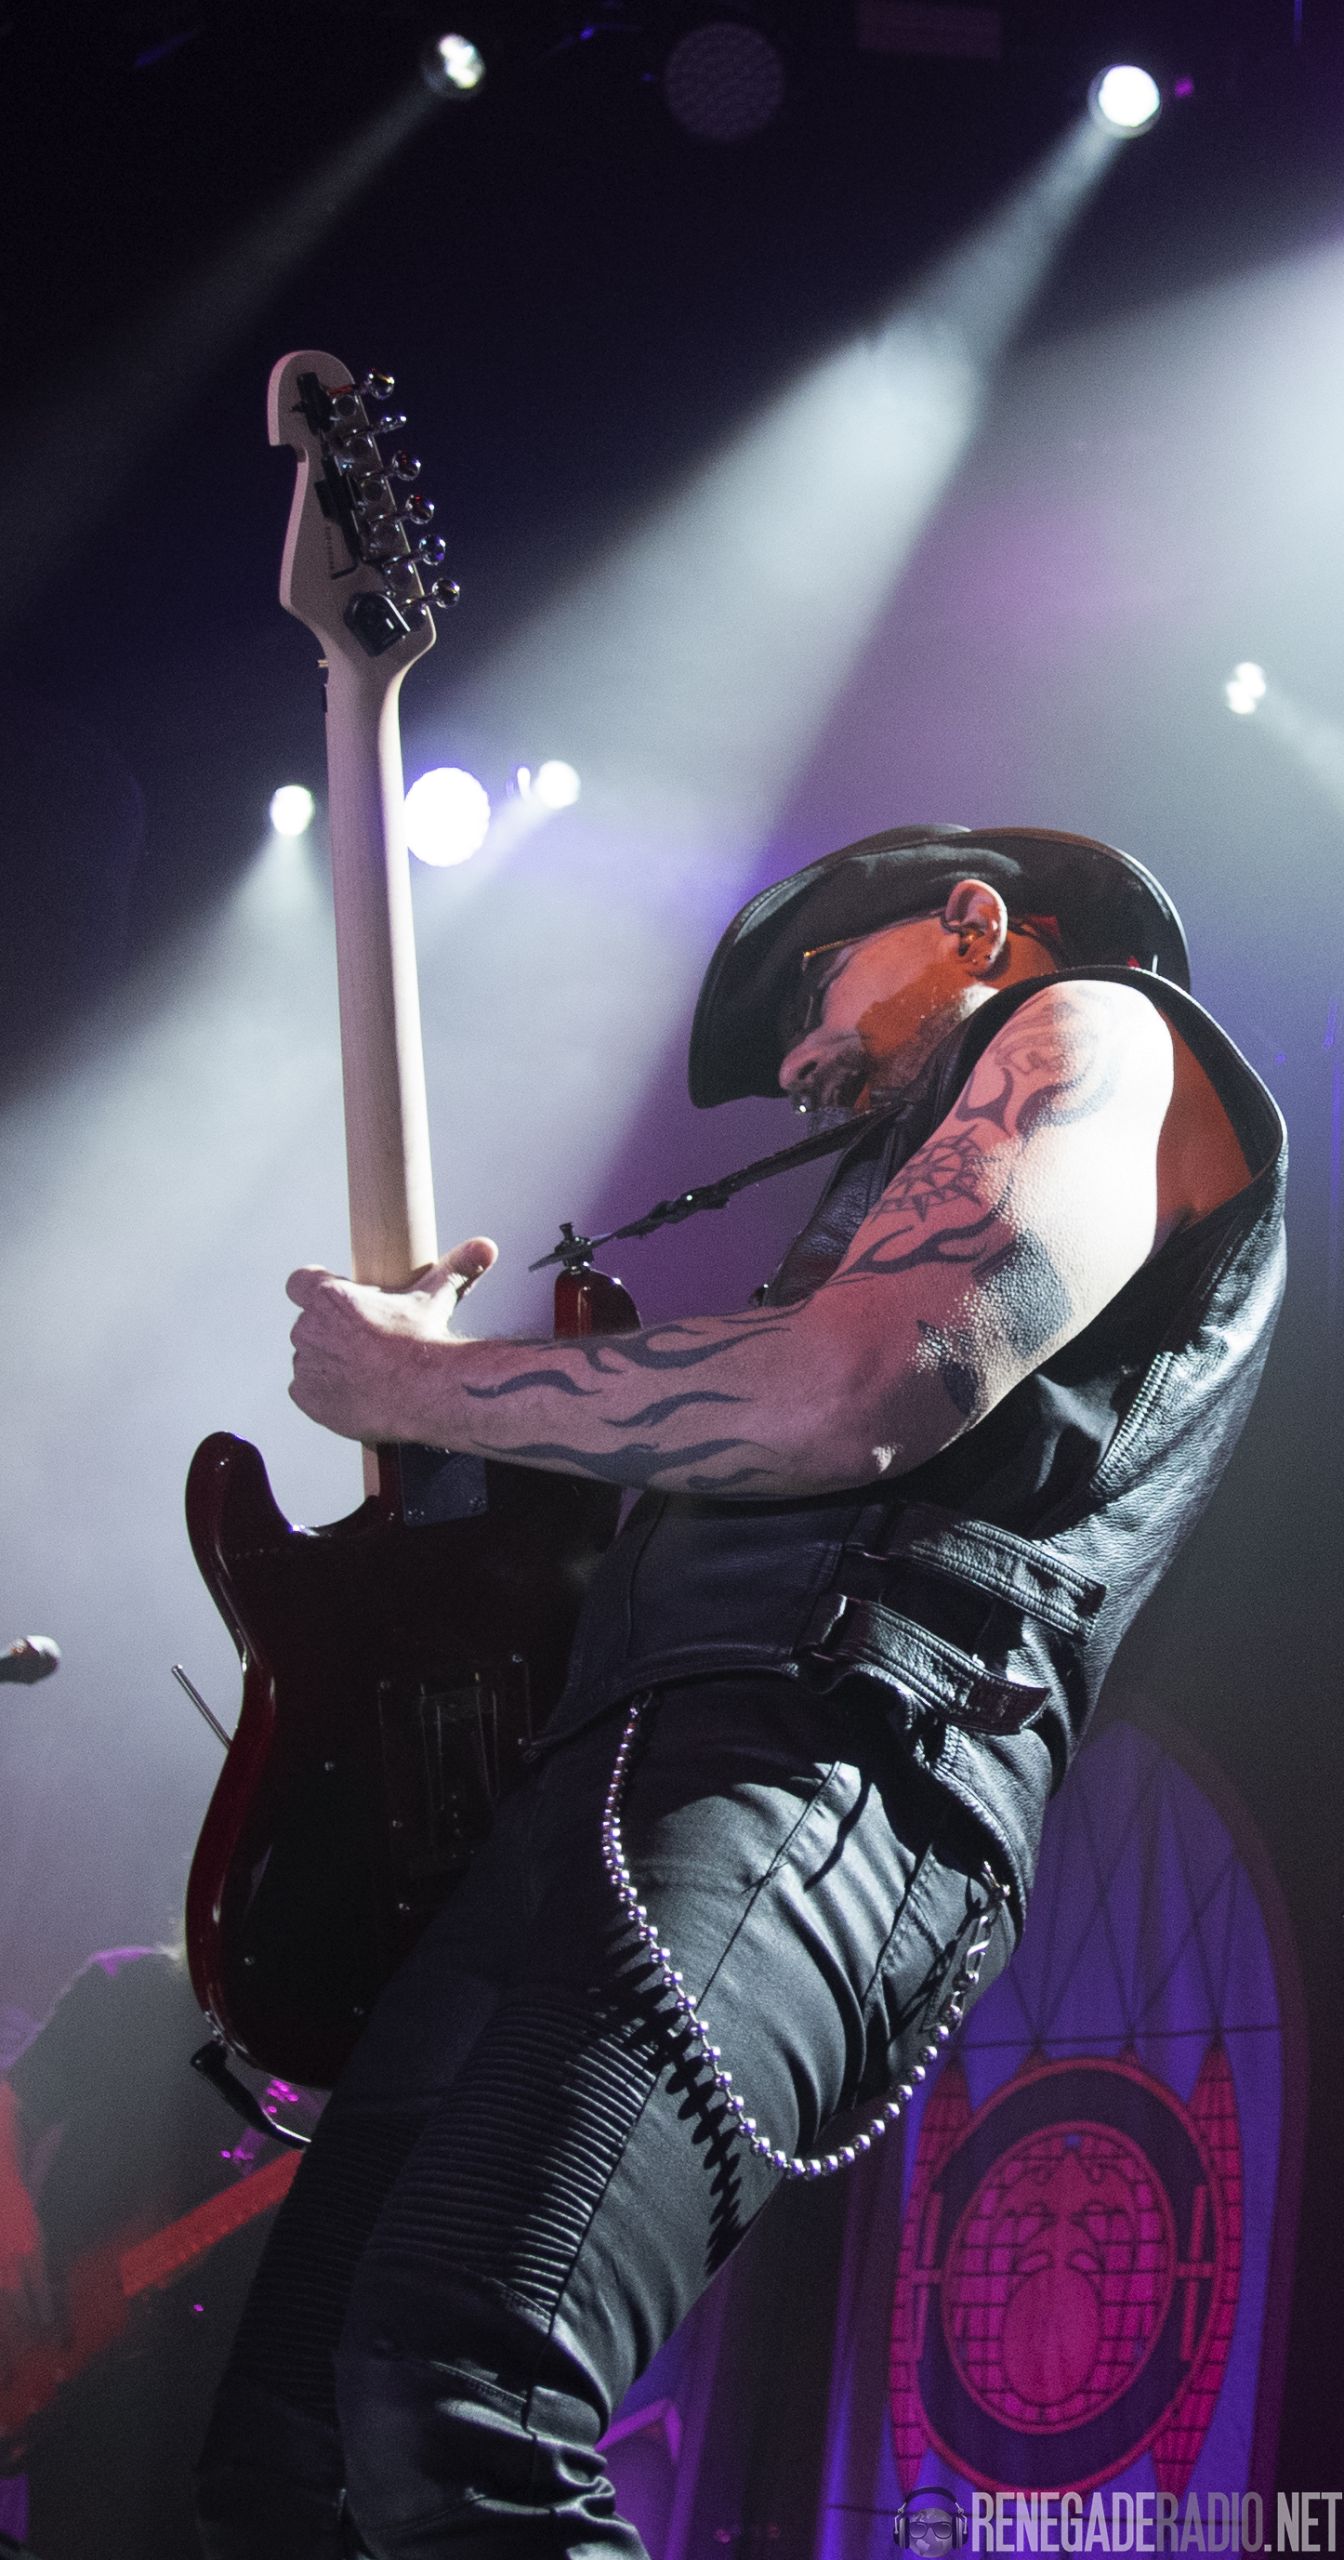 K3 - Queensryche - The Factory - 11-25-22 (10)